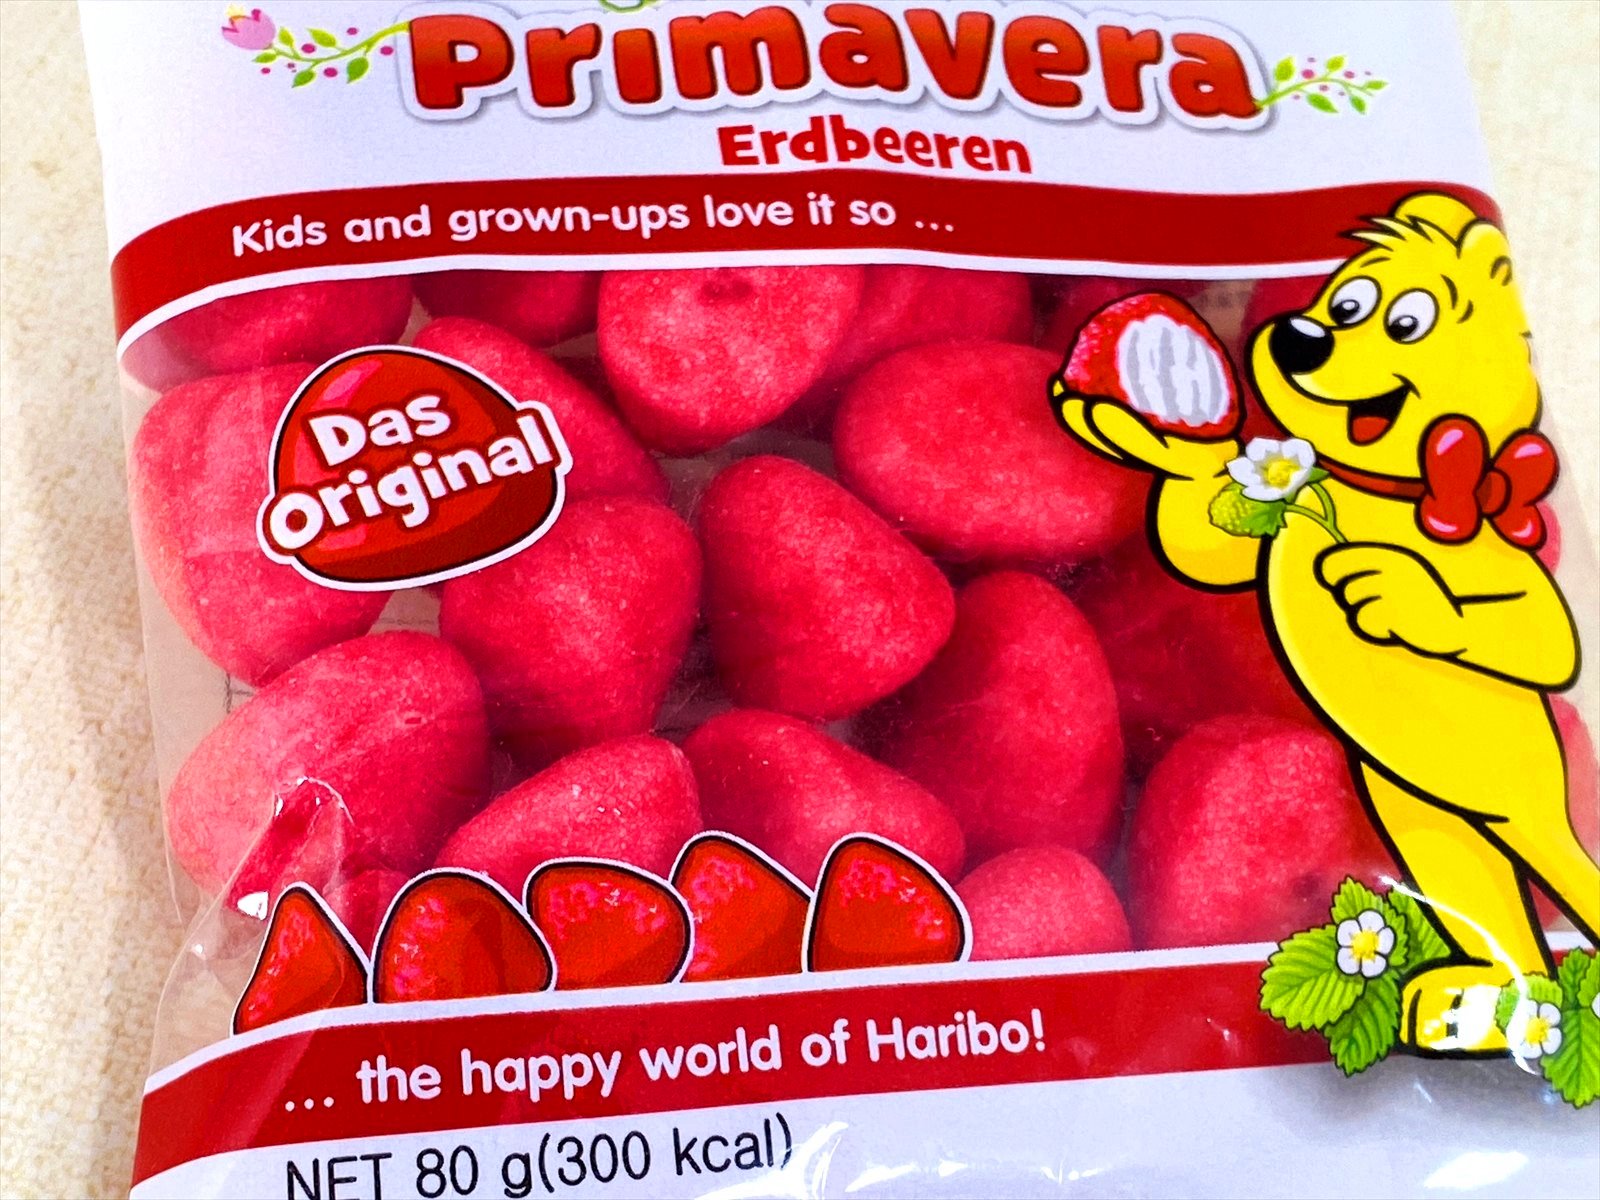 Kids and grown-ups love it so... the happy world of Haribo!